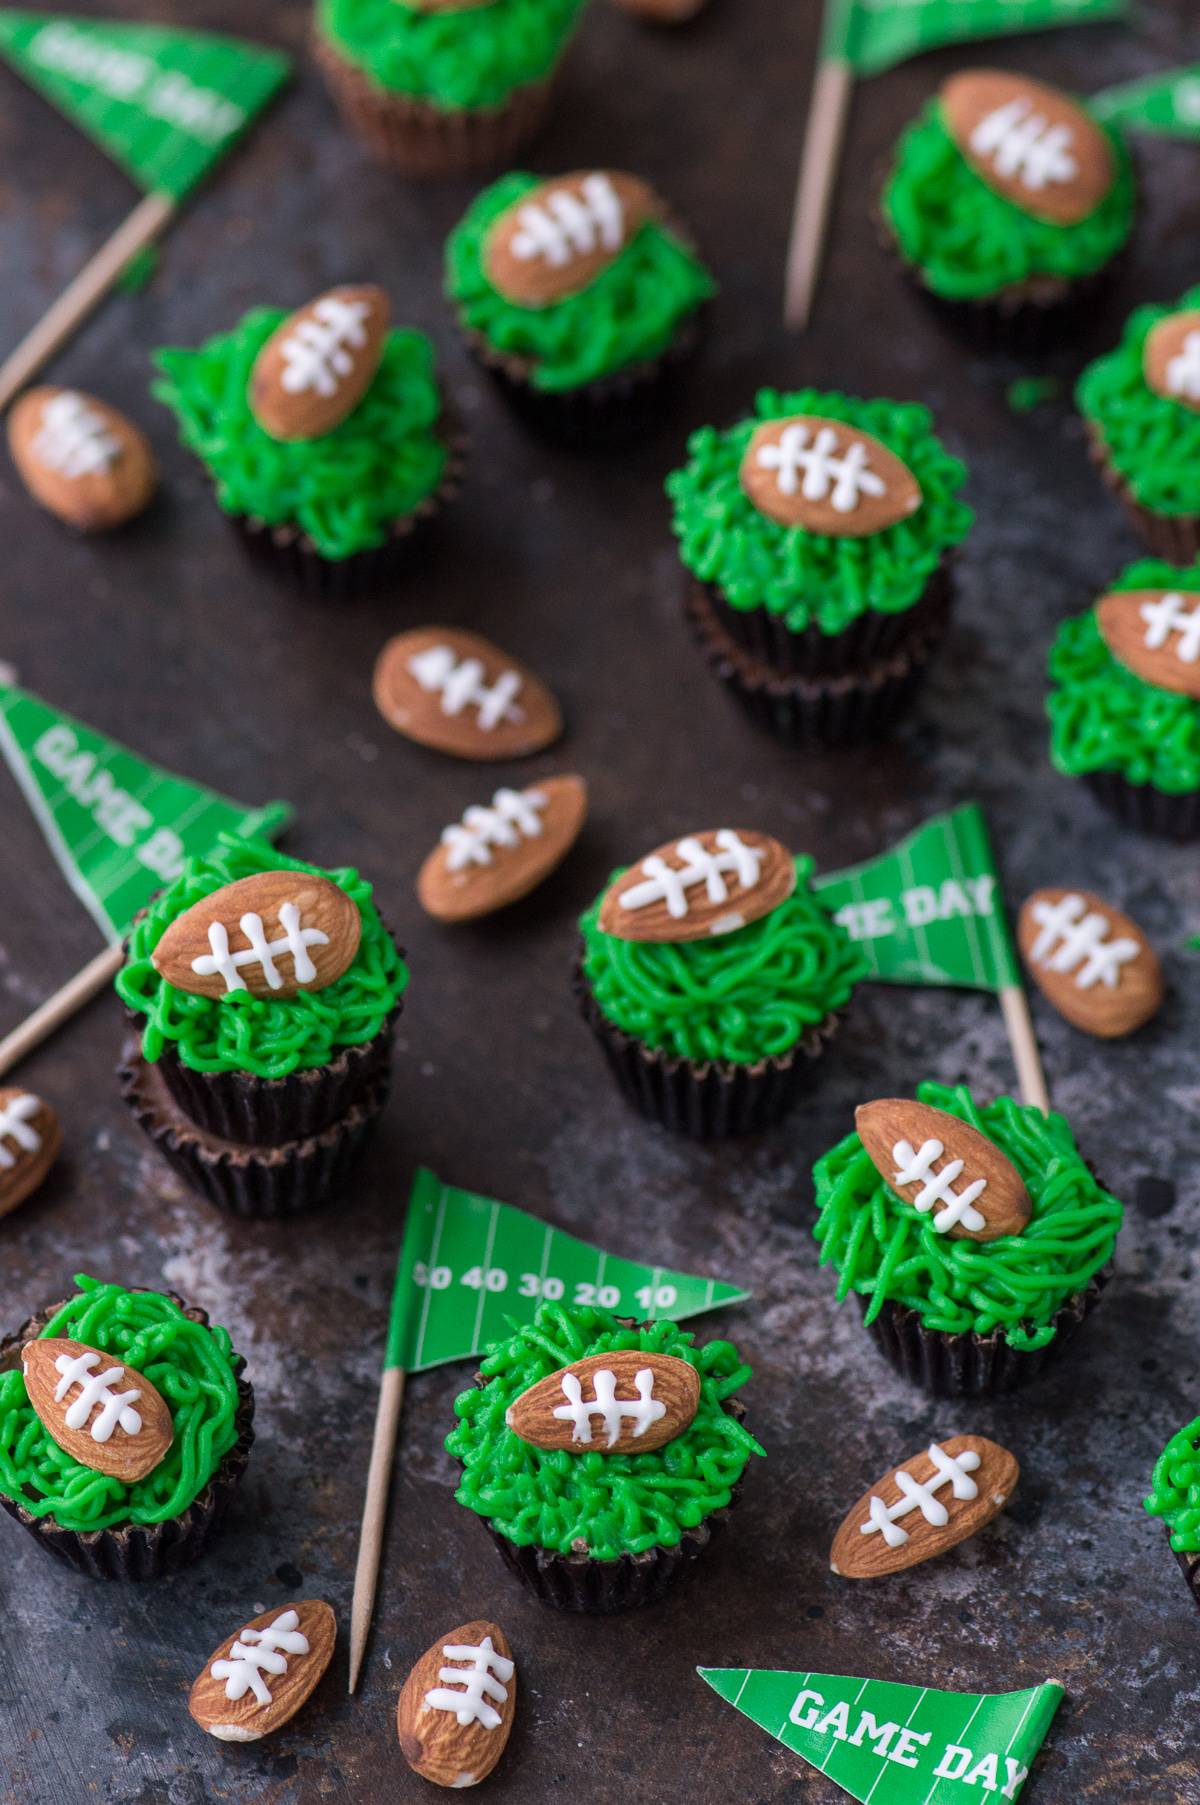 These reese’s peanut butter football cups are the easiest game treat! You need peanut butter cups, green frosting and football almonds!